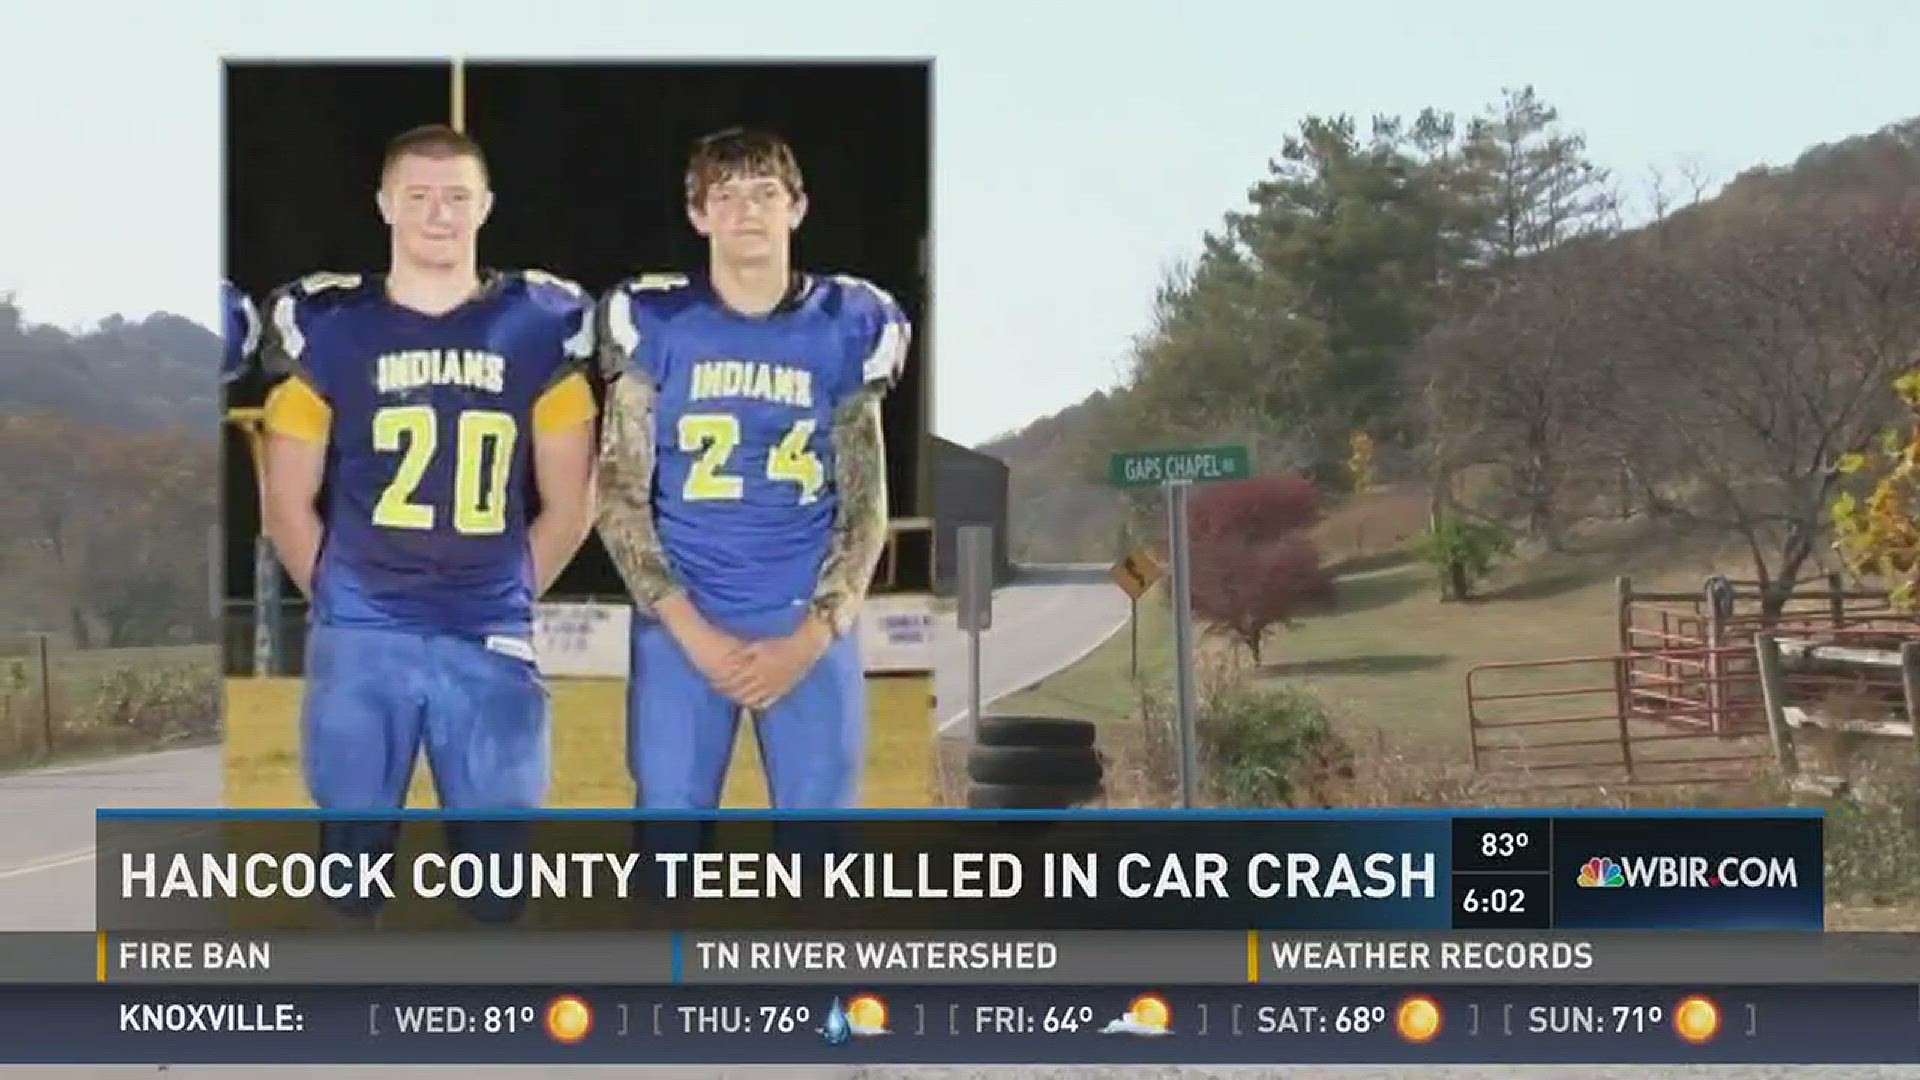 Nov. 1, 2016: The Hancock County community is reeling after a crash that killed a 15-year-old student and badly injured his brother.